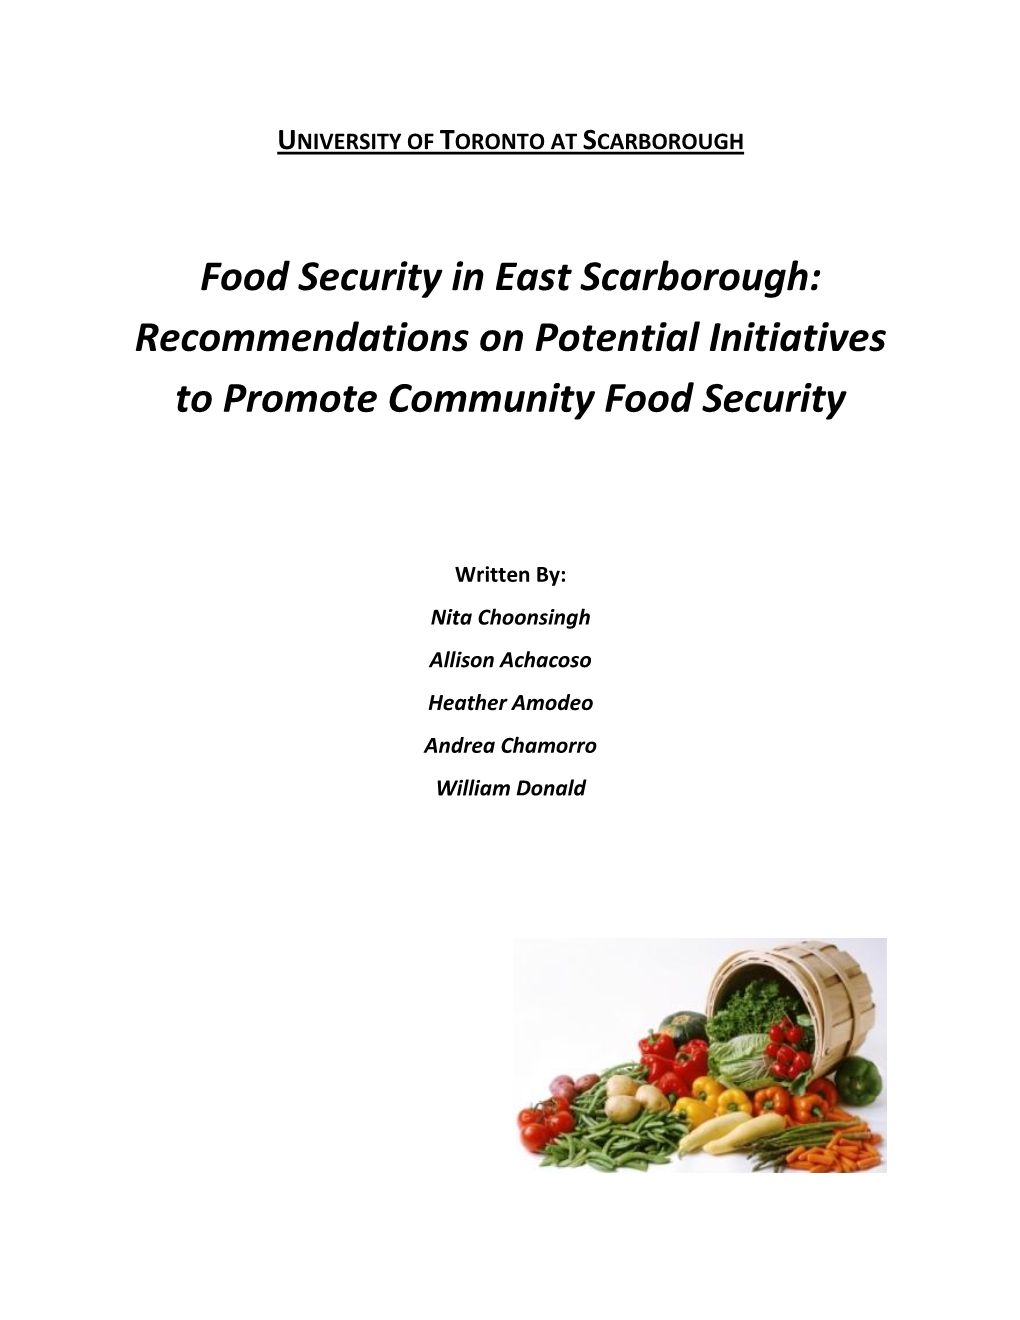 Food Security in East Scarborough: Recommendations on Potential Initiatives to Promote Community Food Security